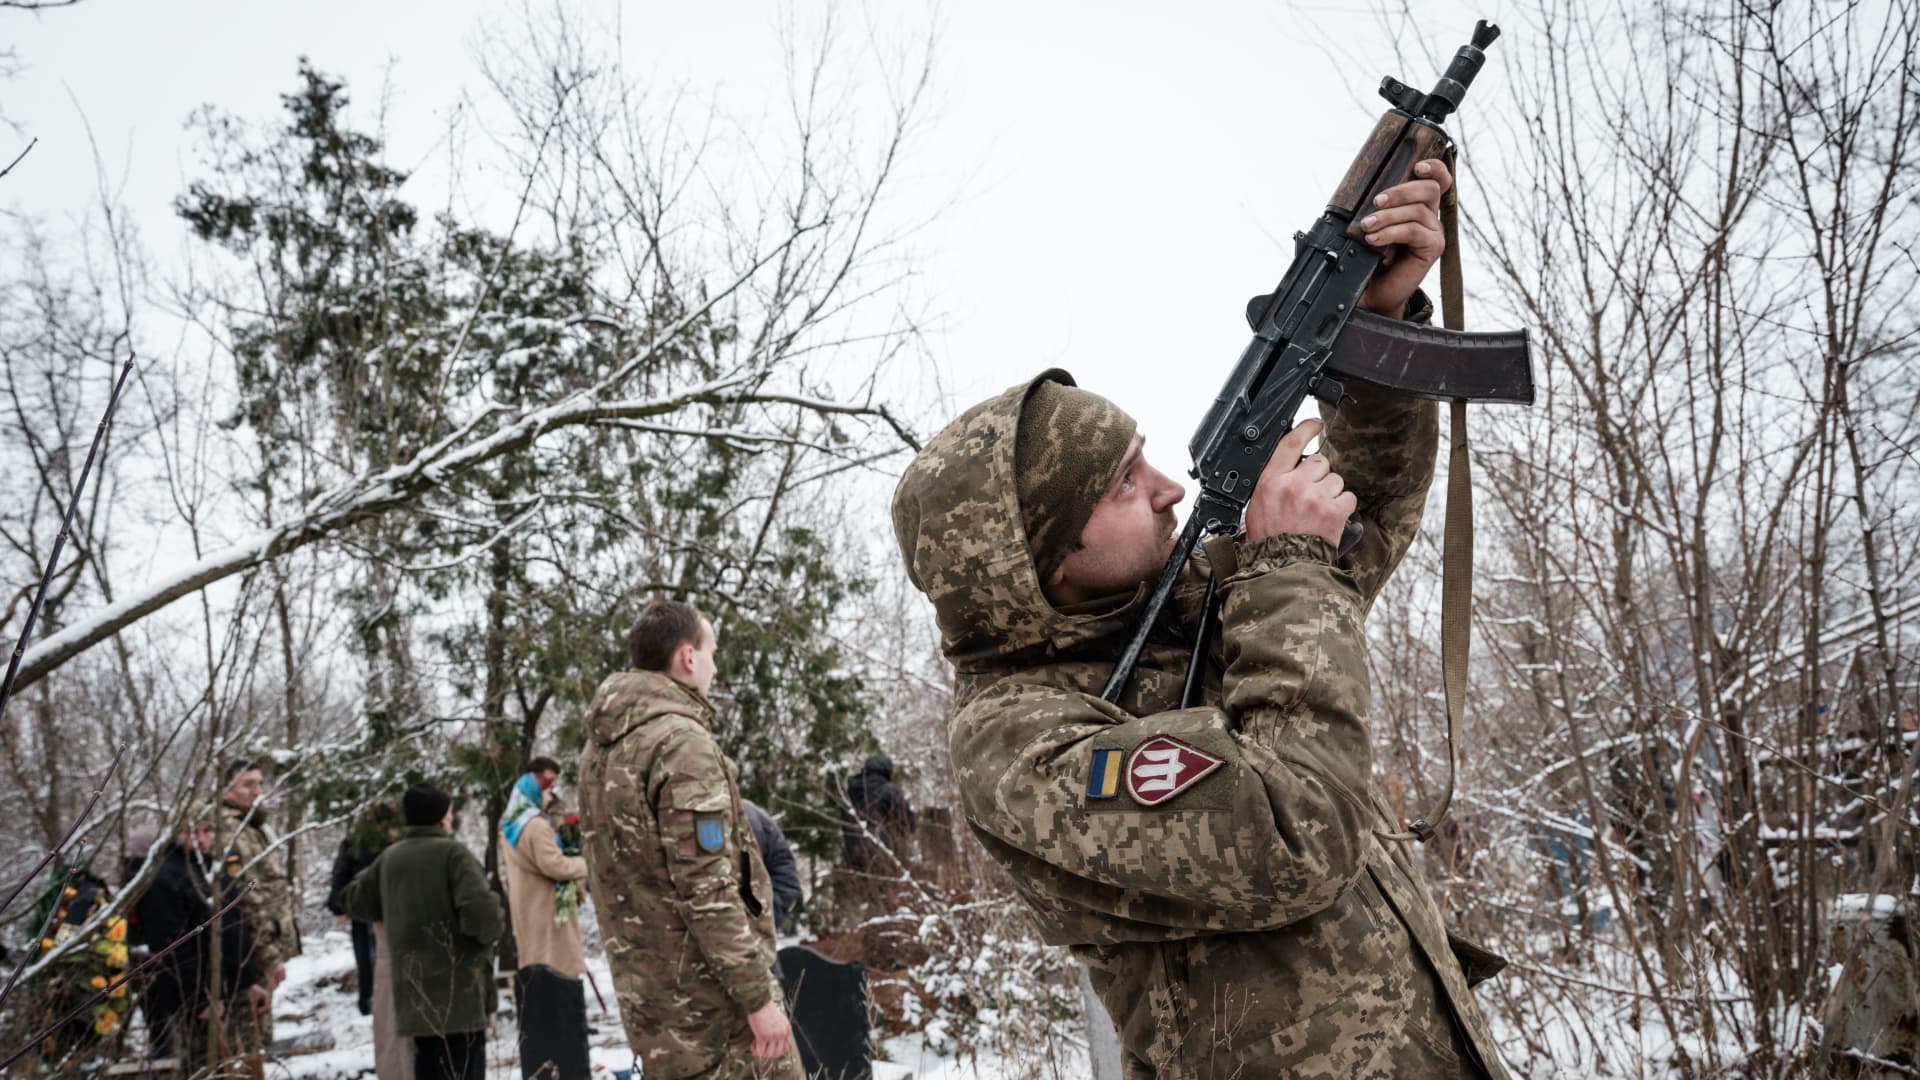 Oleksiy Storozh (R), 28, fires his rifle in the air during the burial of his best friend, the late Ukrainian serviceman of the Azov battalion killed in action in Bakhmut, 28-year-old orphan Oleksandr Korovniy, at a cemetery in Sloviansk on January 30, 2023, amid the Russian invasion of Ukraine. 